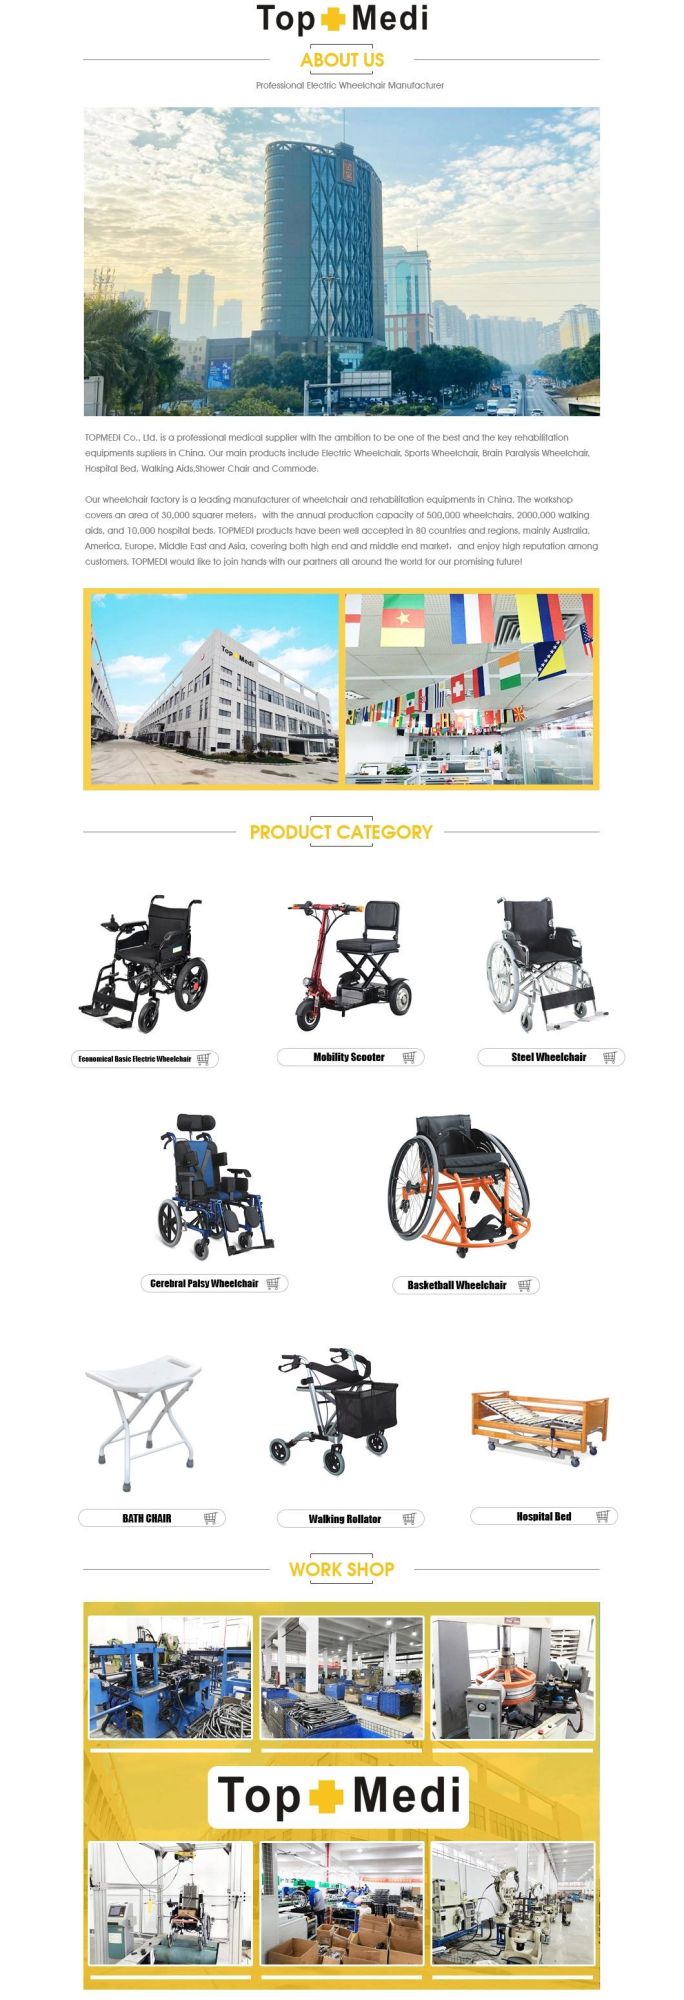 Tcm-01h Electric Lift up Transfer Wheelchair with Commode